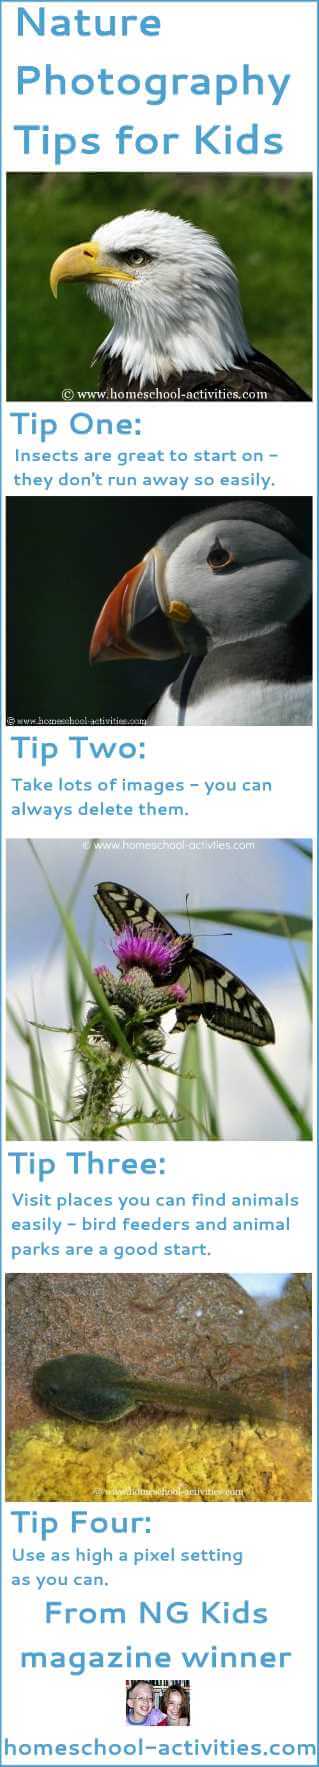 nature photography tips for kids